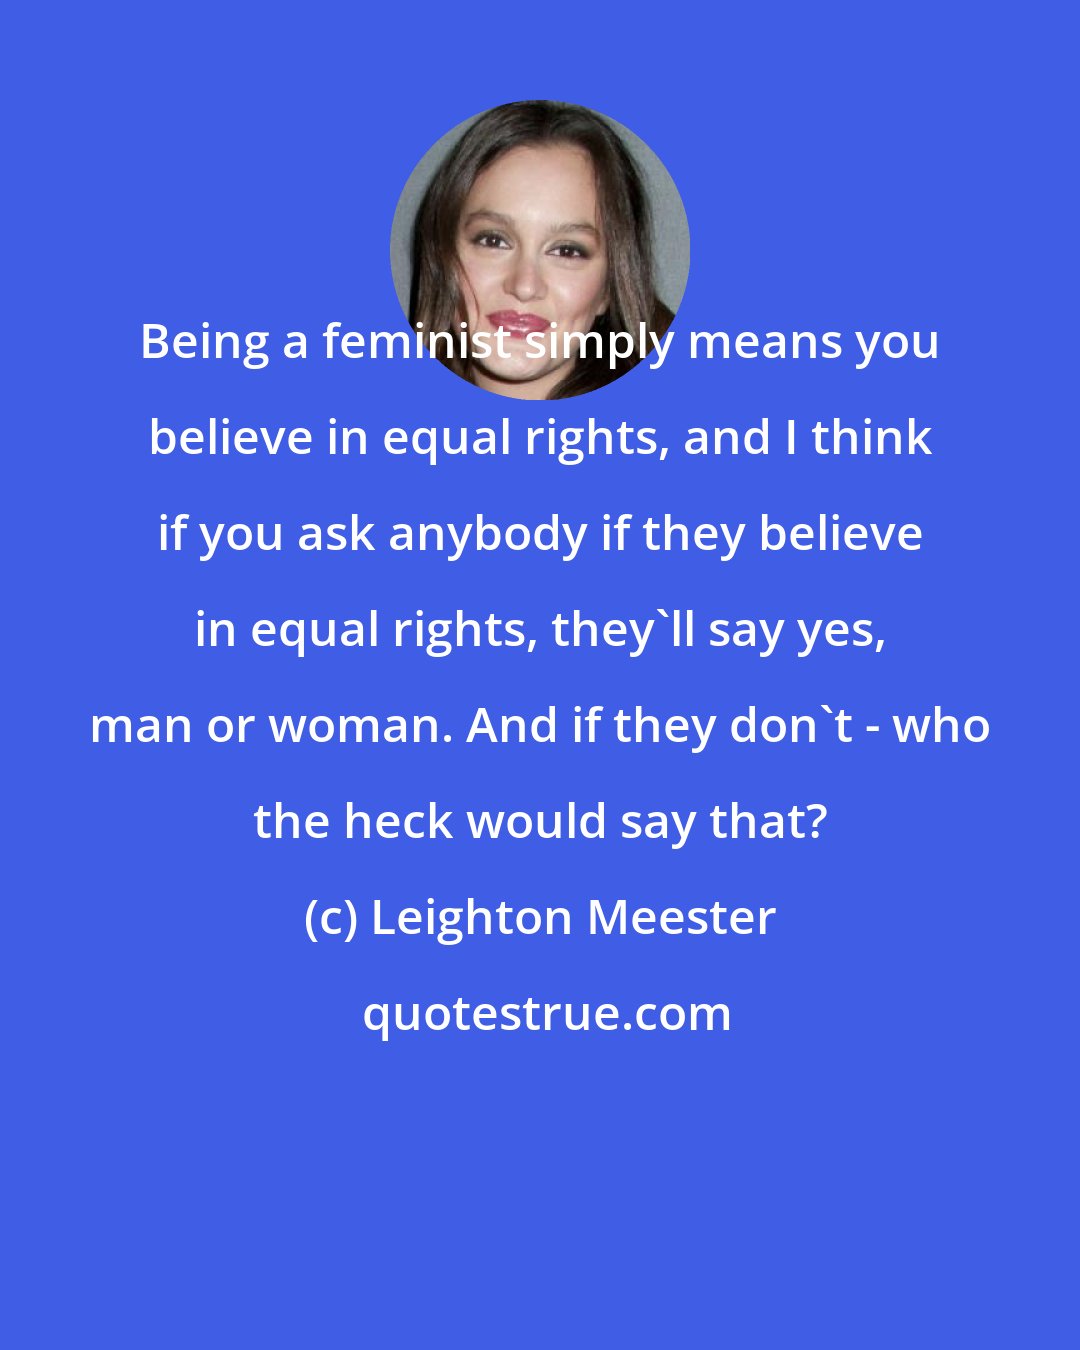 Leighton Meester: Being a feminist simply means you believe in equal rights, and I think if you ask anybody if they believe in equal rights, they'll say yes, man or woman. And if they don't - who the heck would say that?